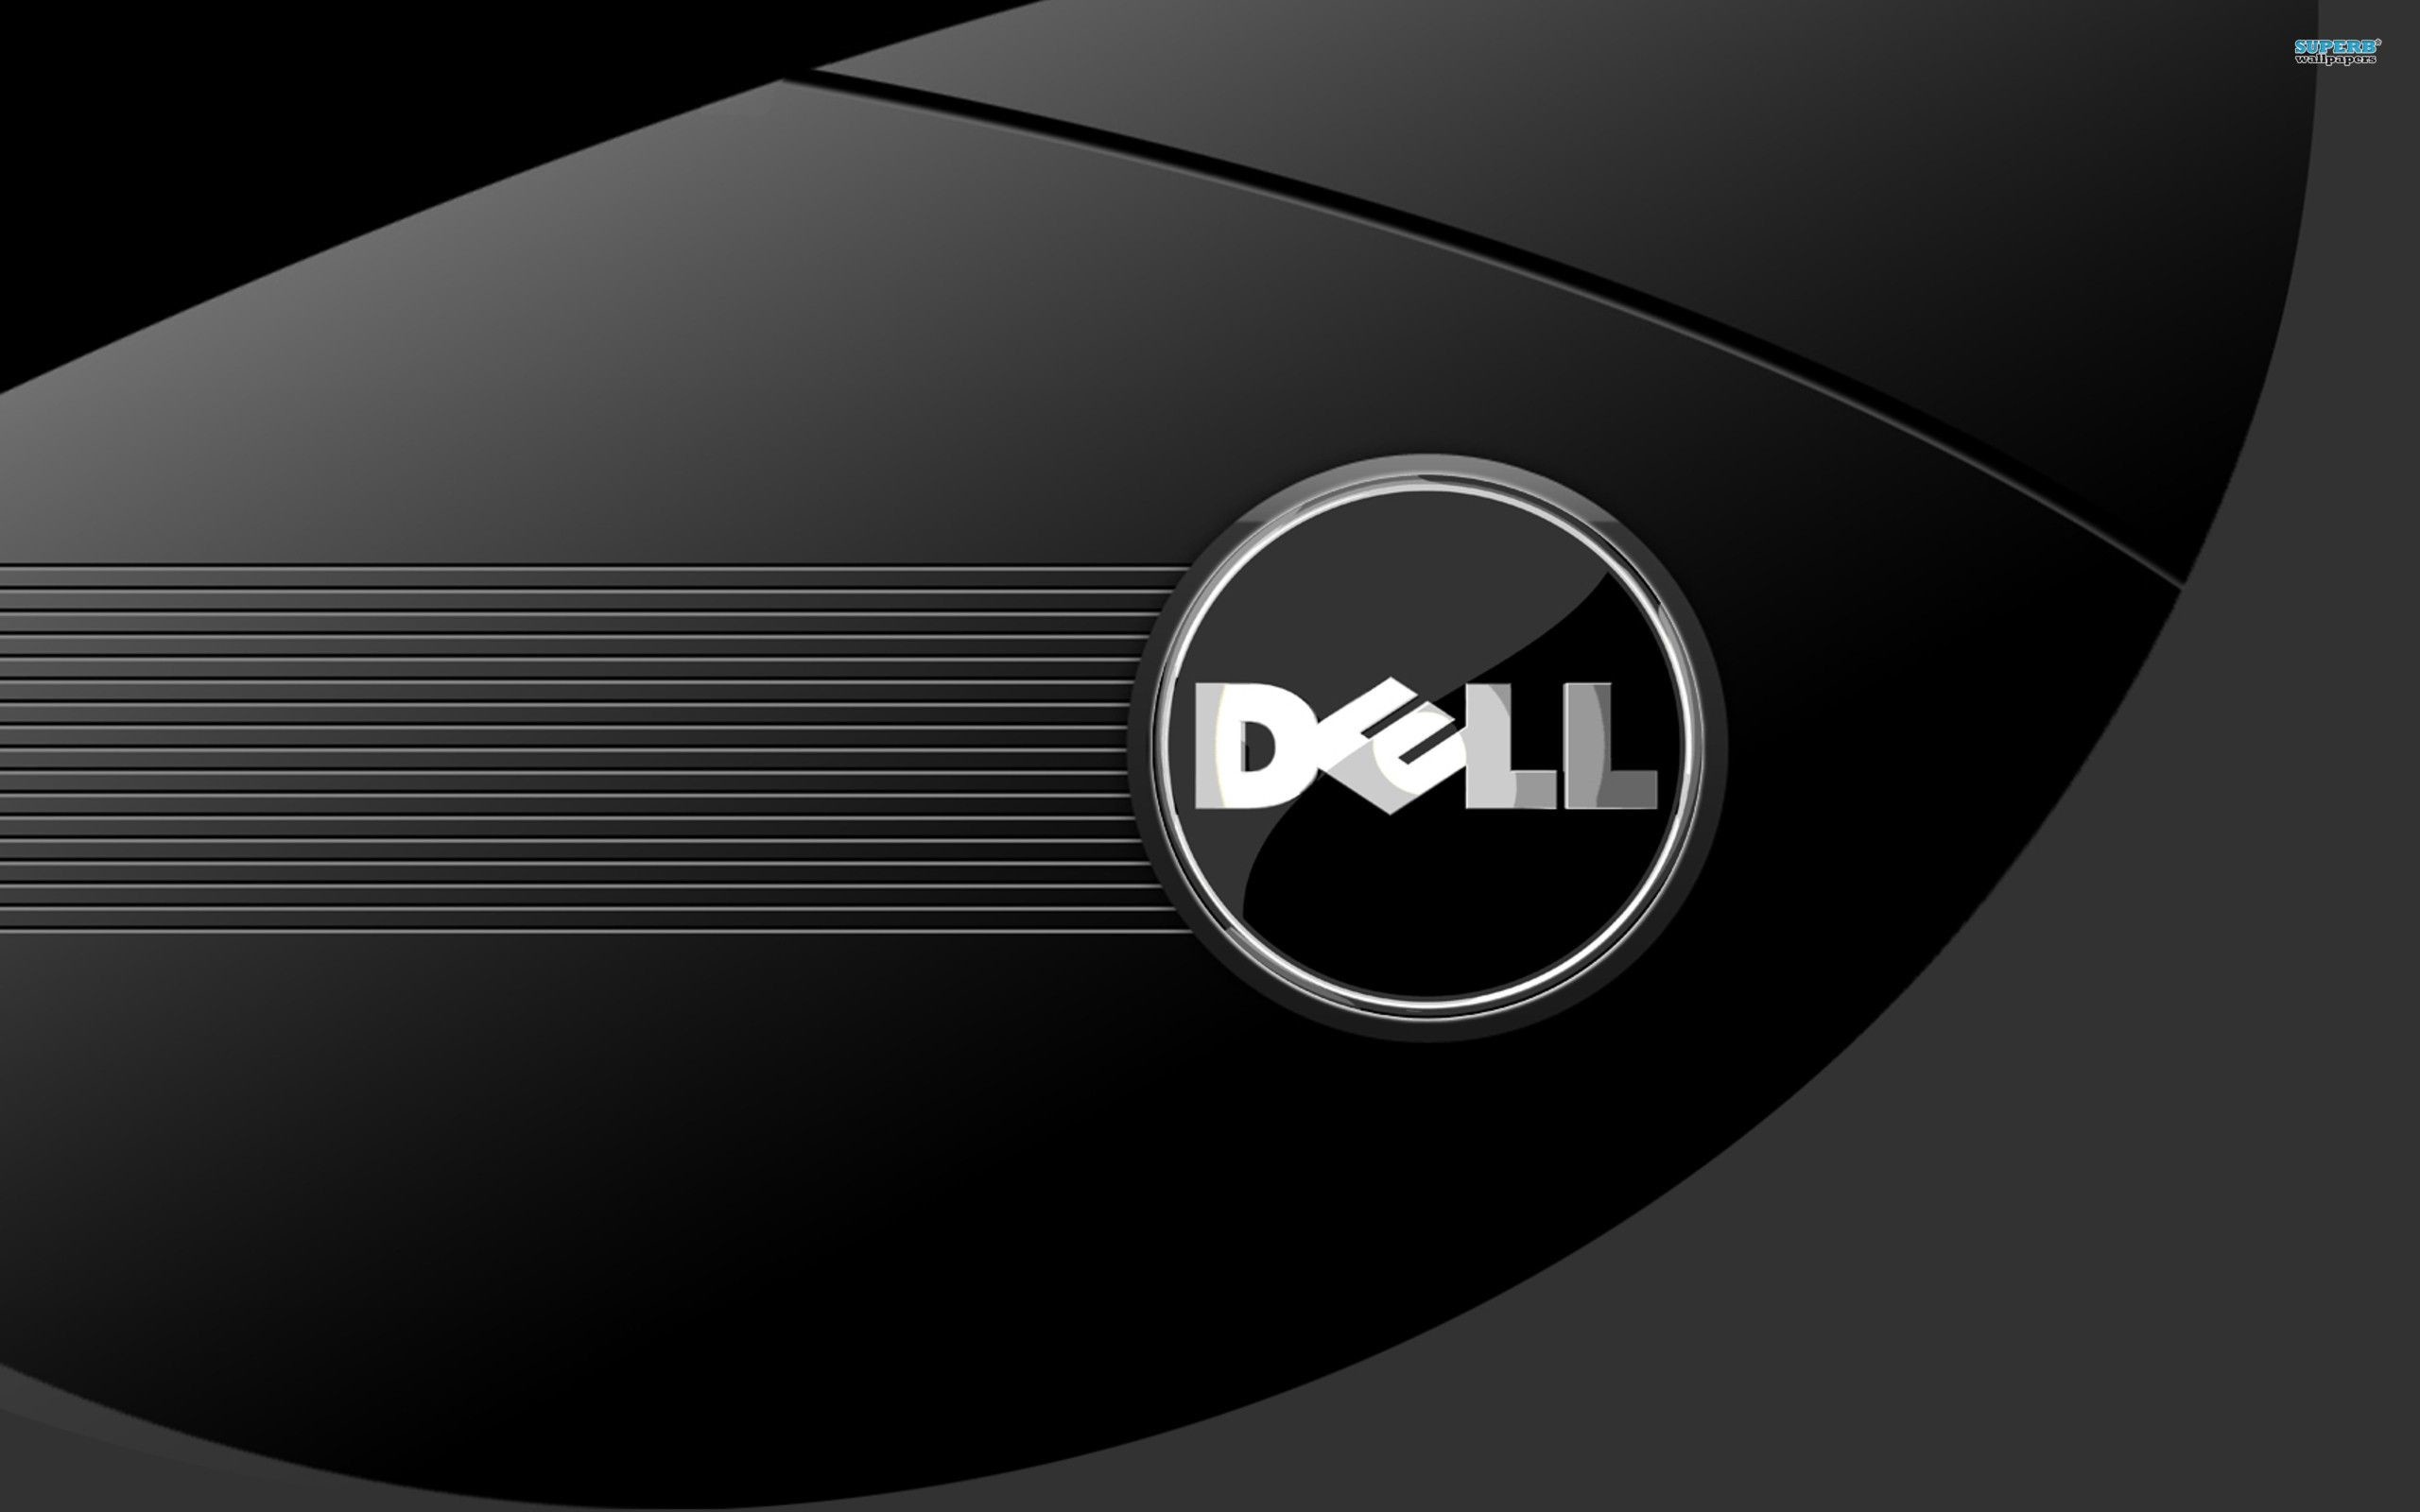 2560x1600 1280x864 px; V.336 Dell Inspiron HD, HD Images